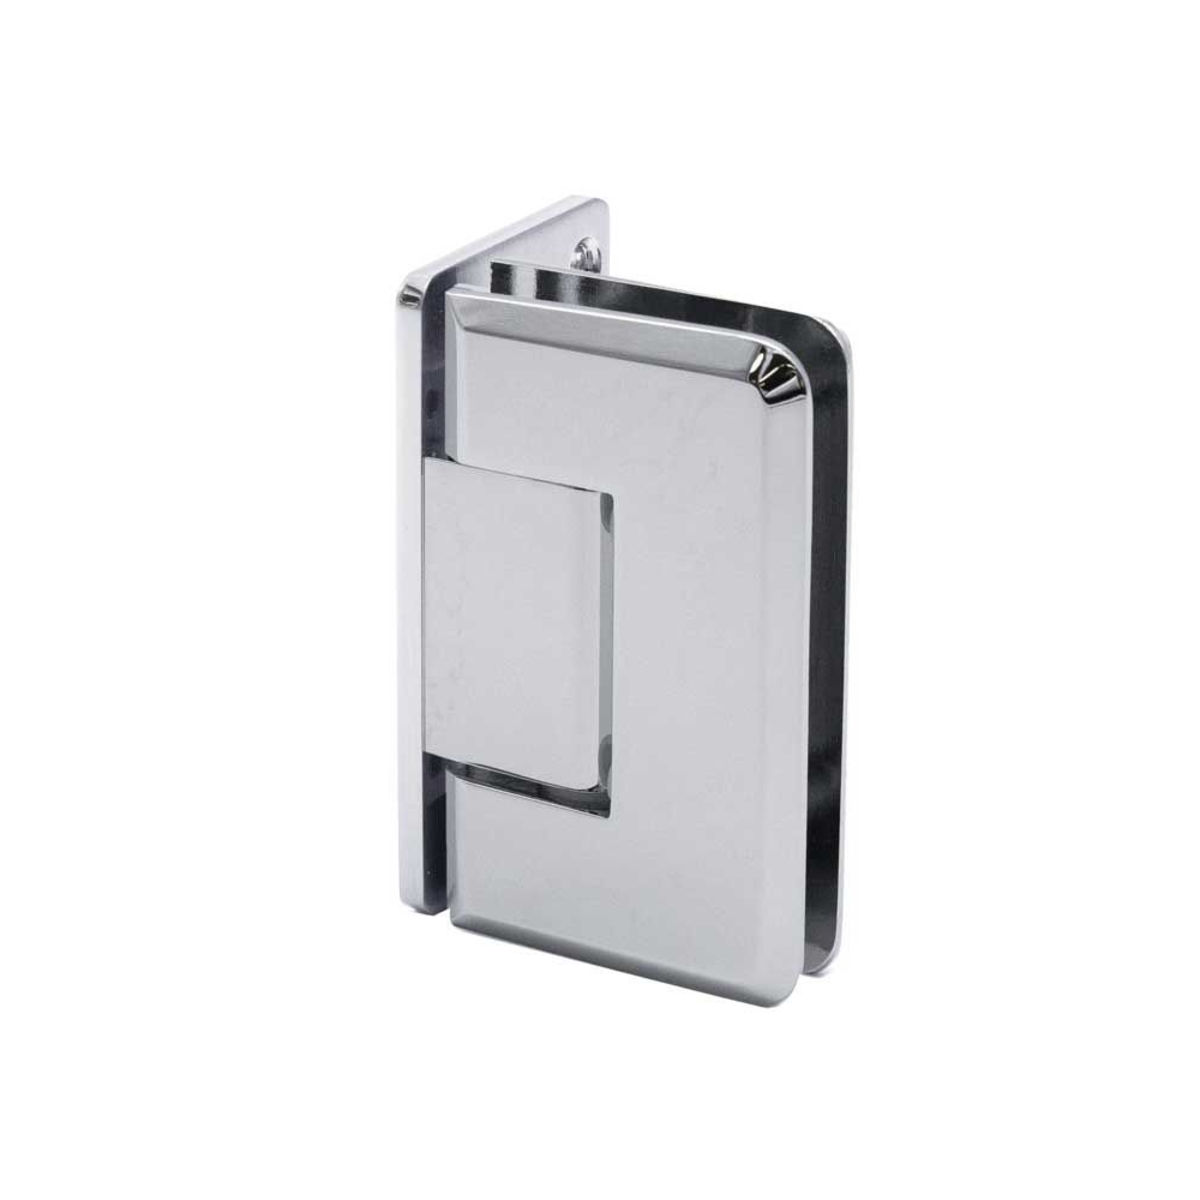 Wall to Glass Offset Back Plate Hinge- Beveled